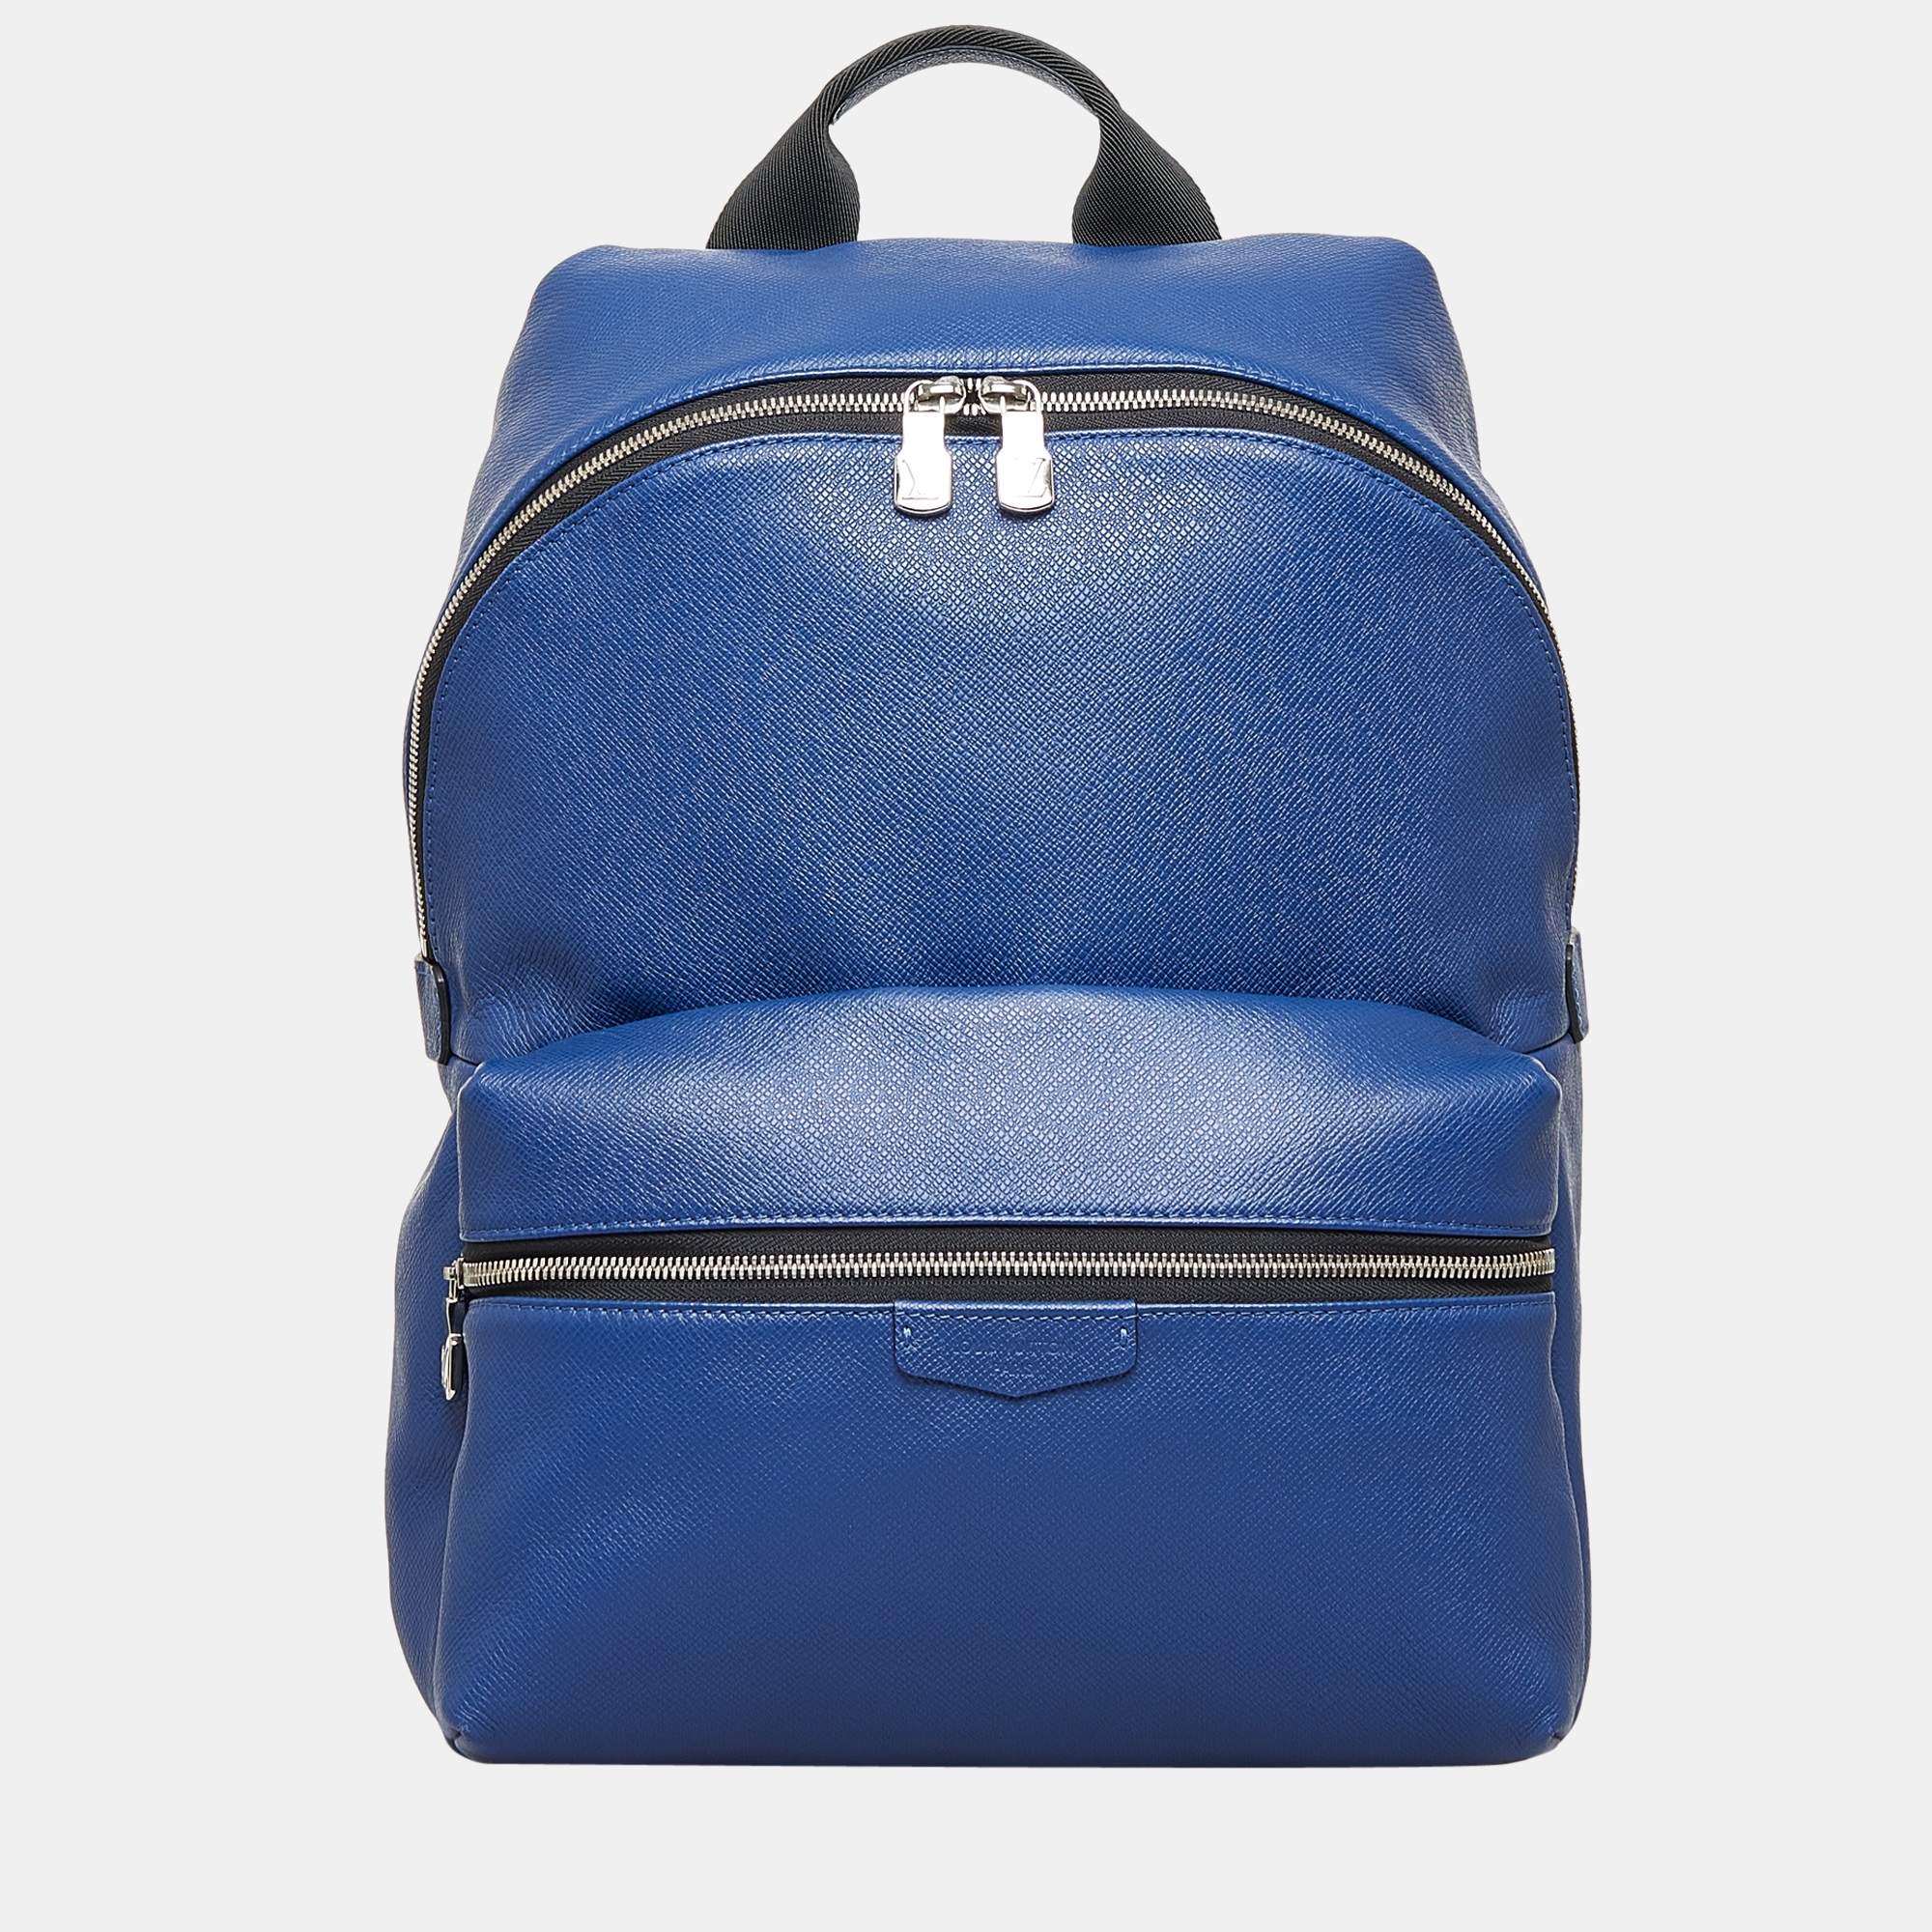 Denim Blue Taigarama Discovery Backpack Silver Hardware, 2020